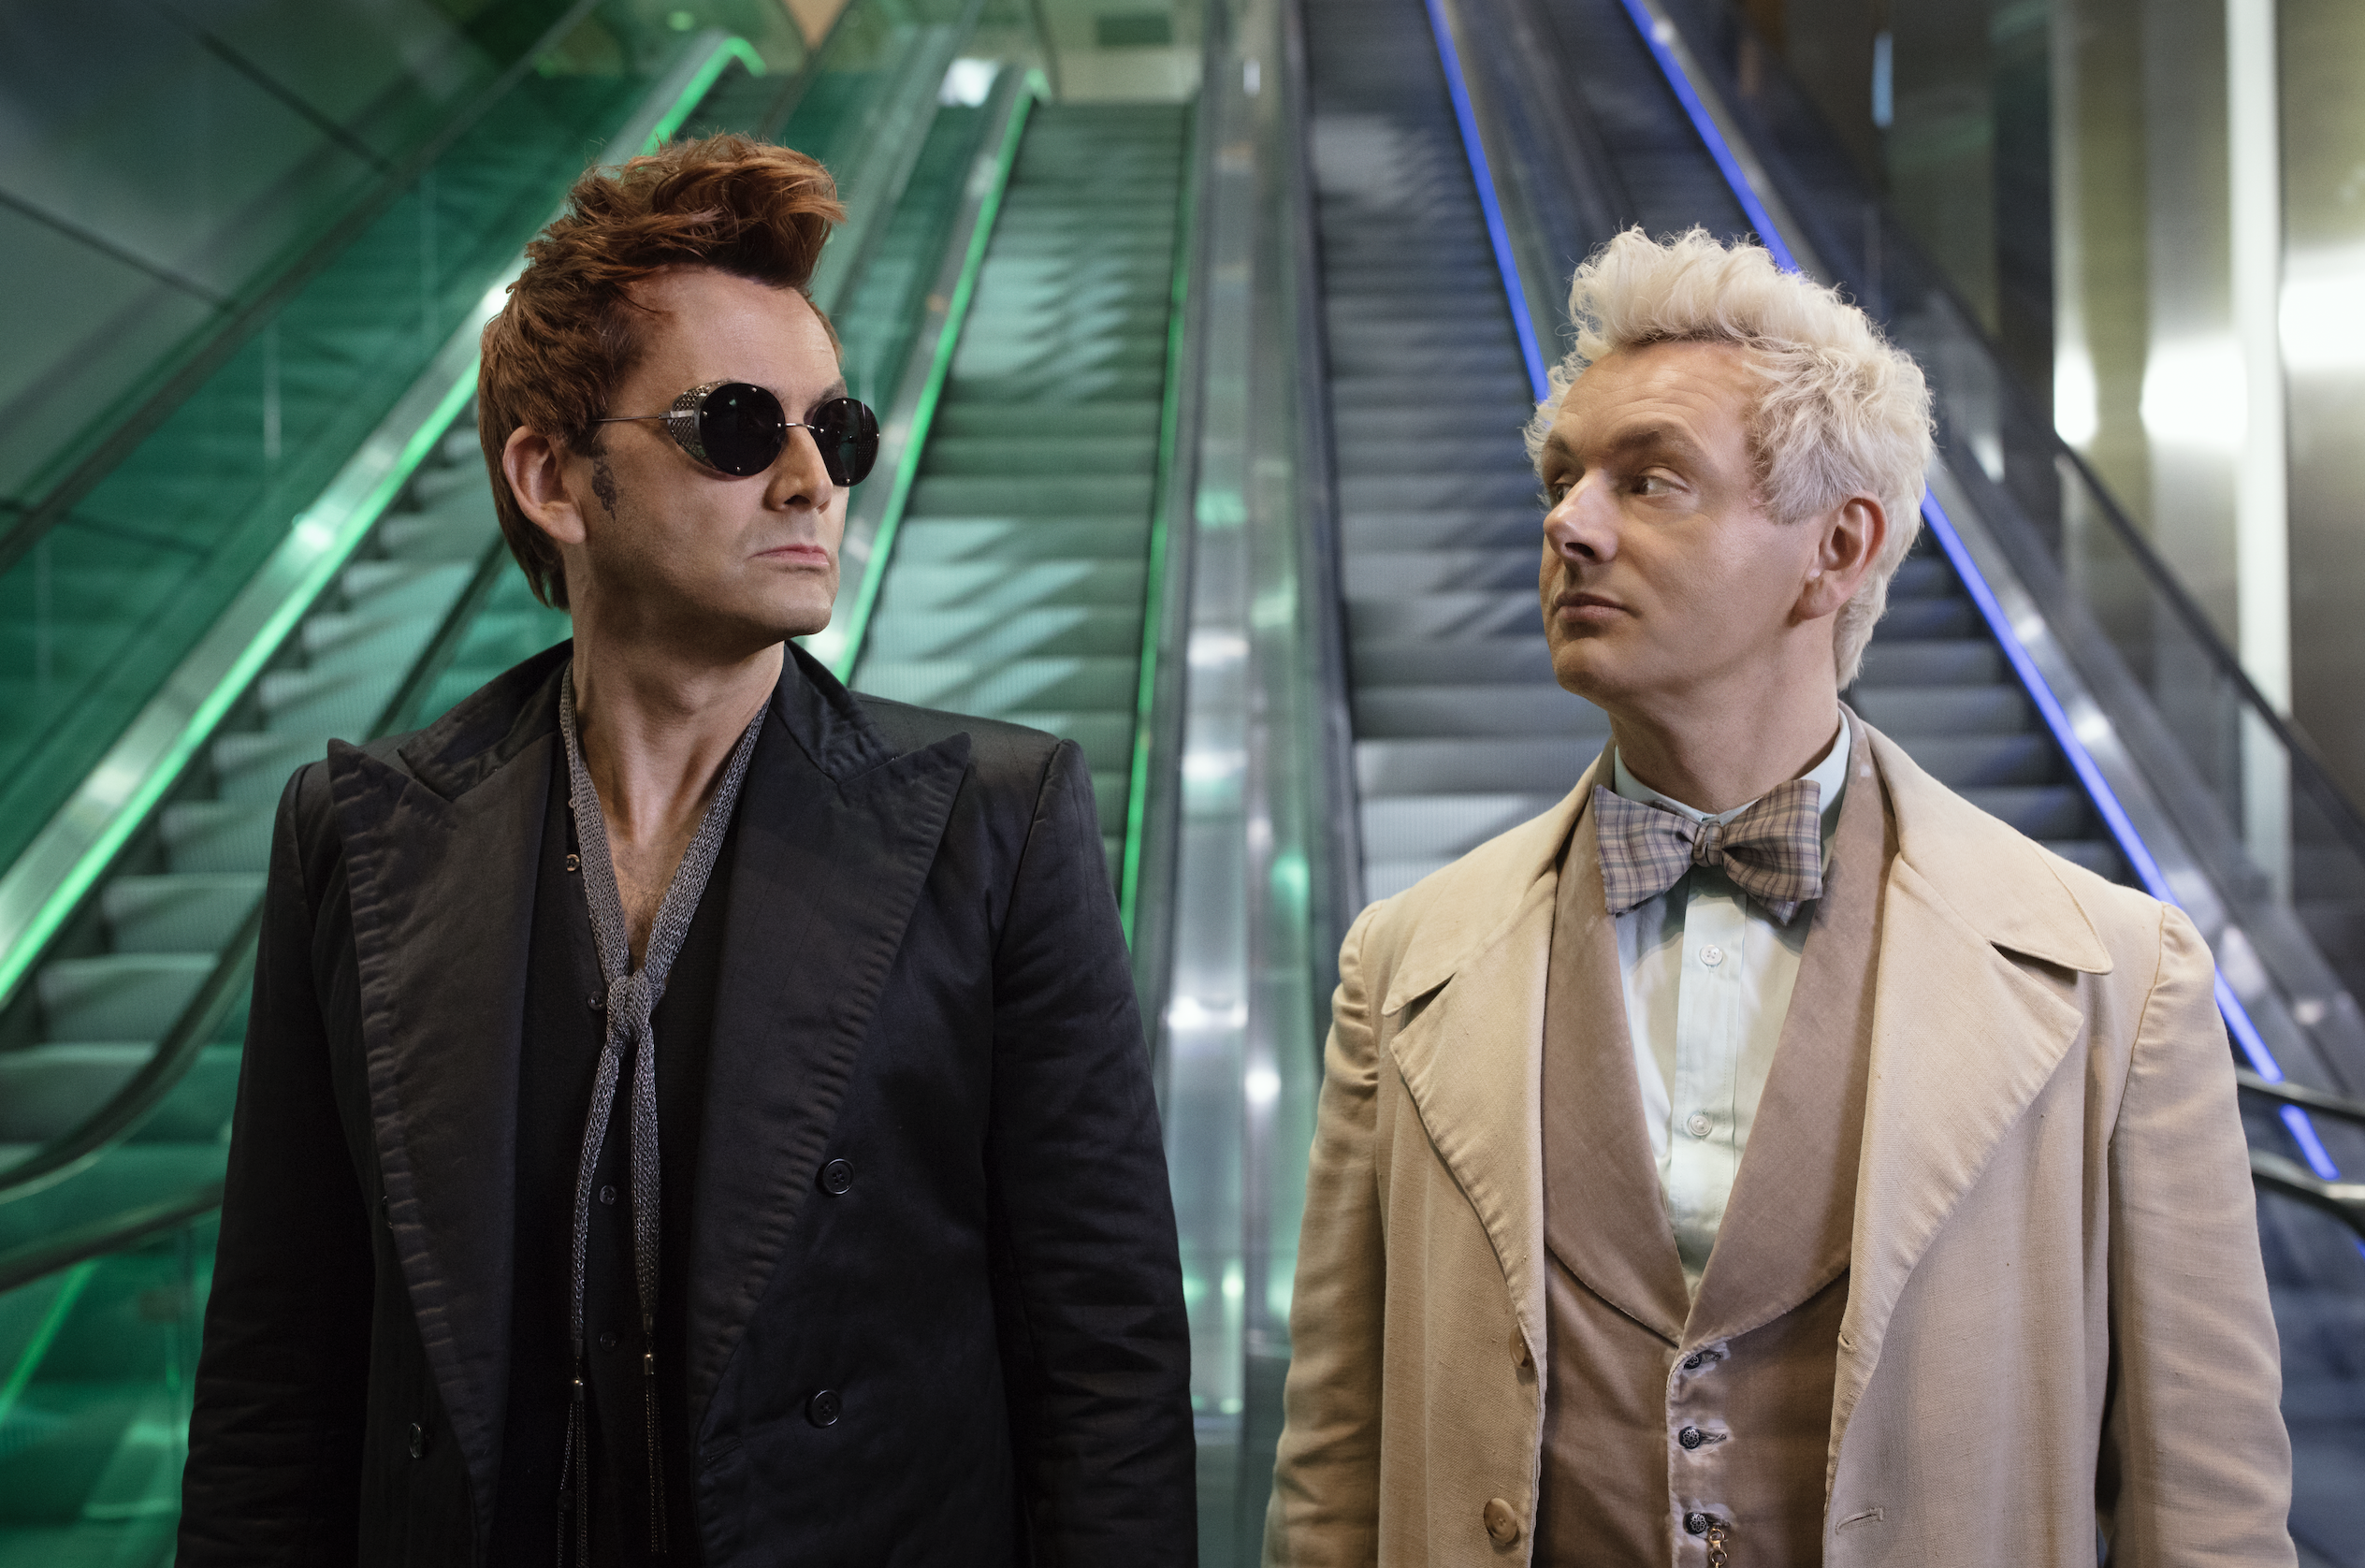 David Tennant as Crowley and Michael Sheen as Aziraphale looking at each other while standing in front of a bank of escalators in Good Omens